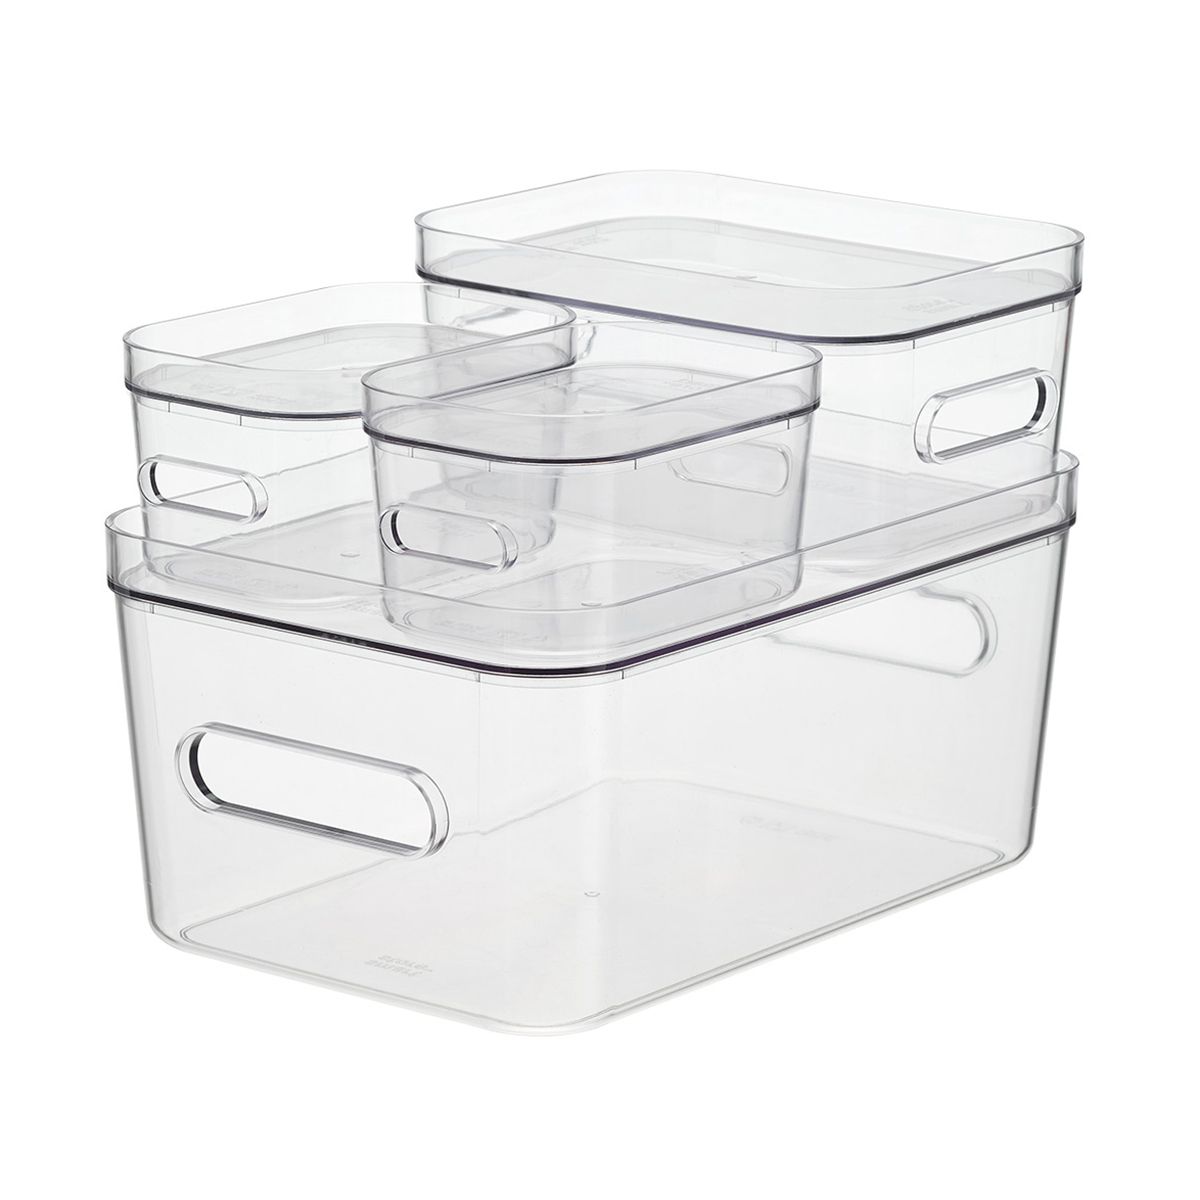 Compact Plastic Bin 4-Pack | The Container Store